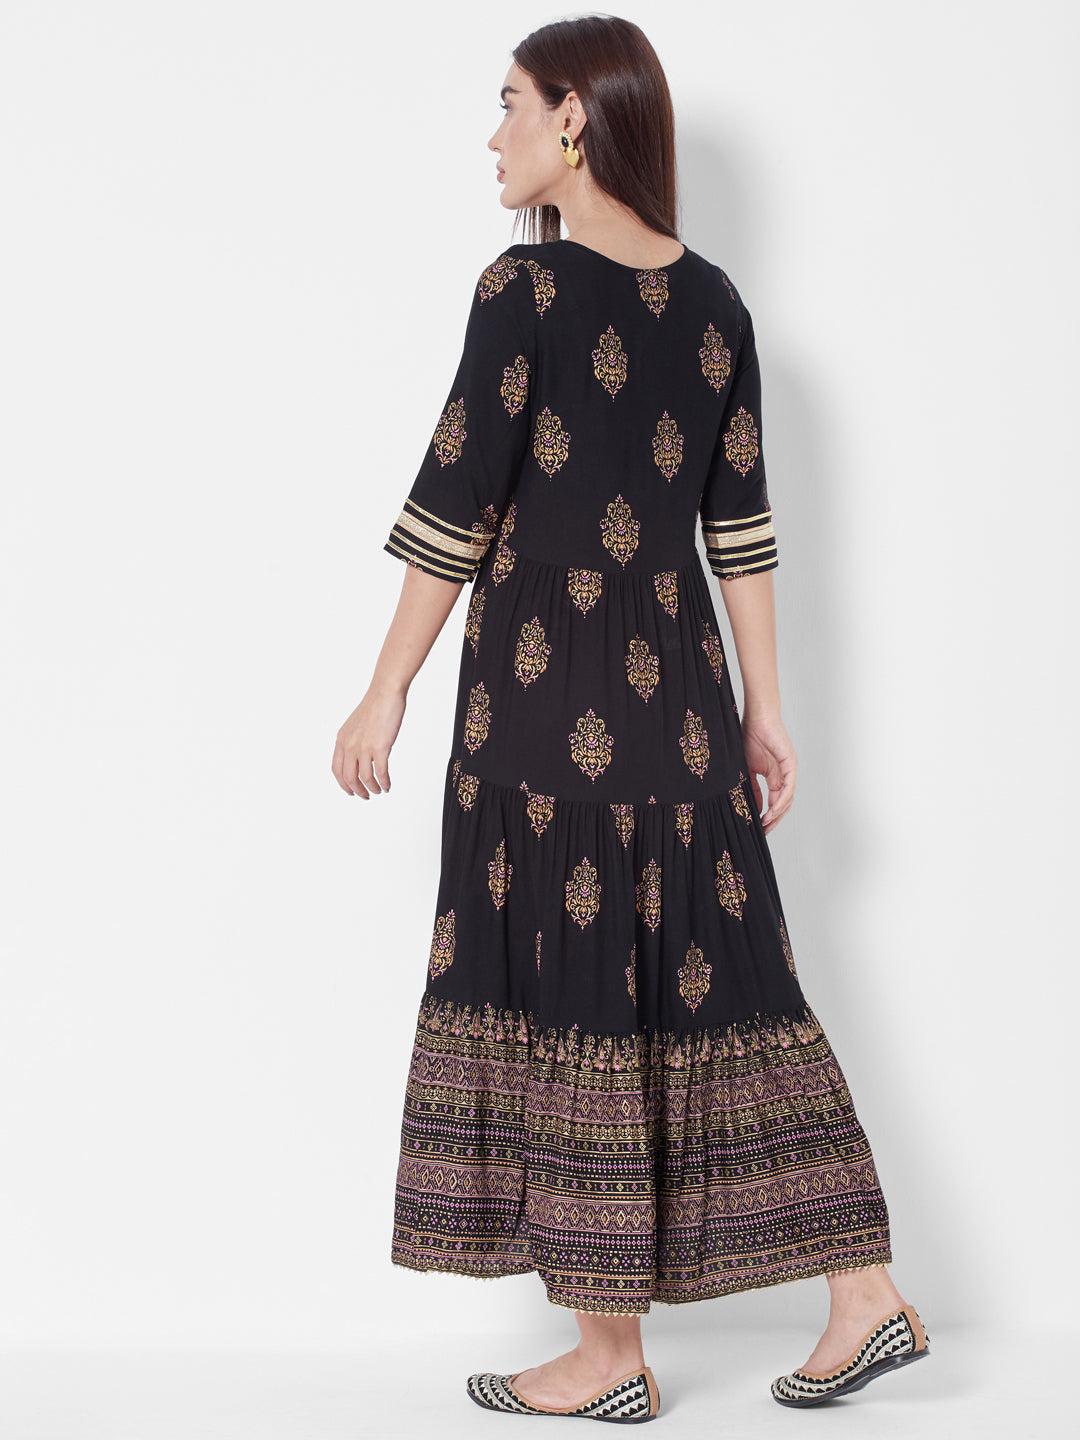 Vedic Ethnic Motifs Printed Tiered A-Line Ethnic Dress